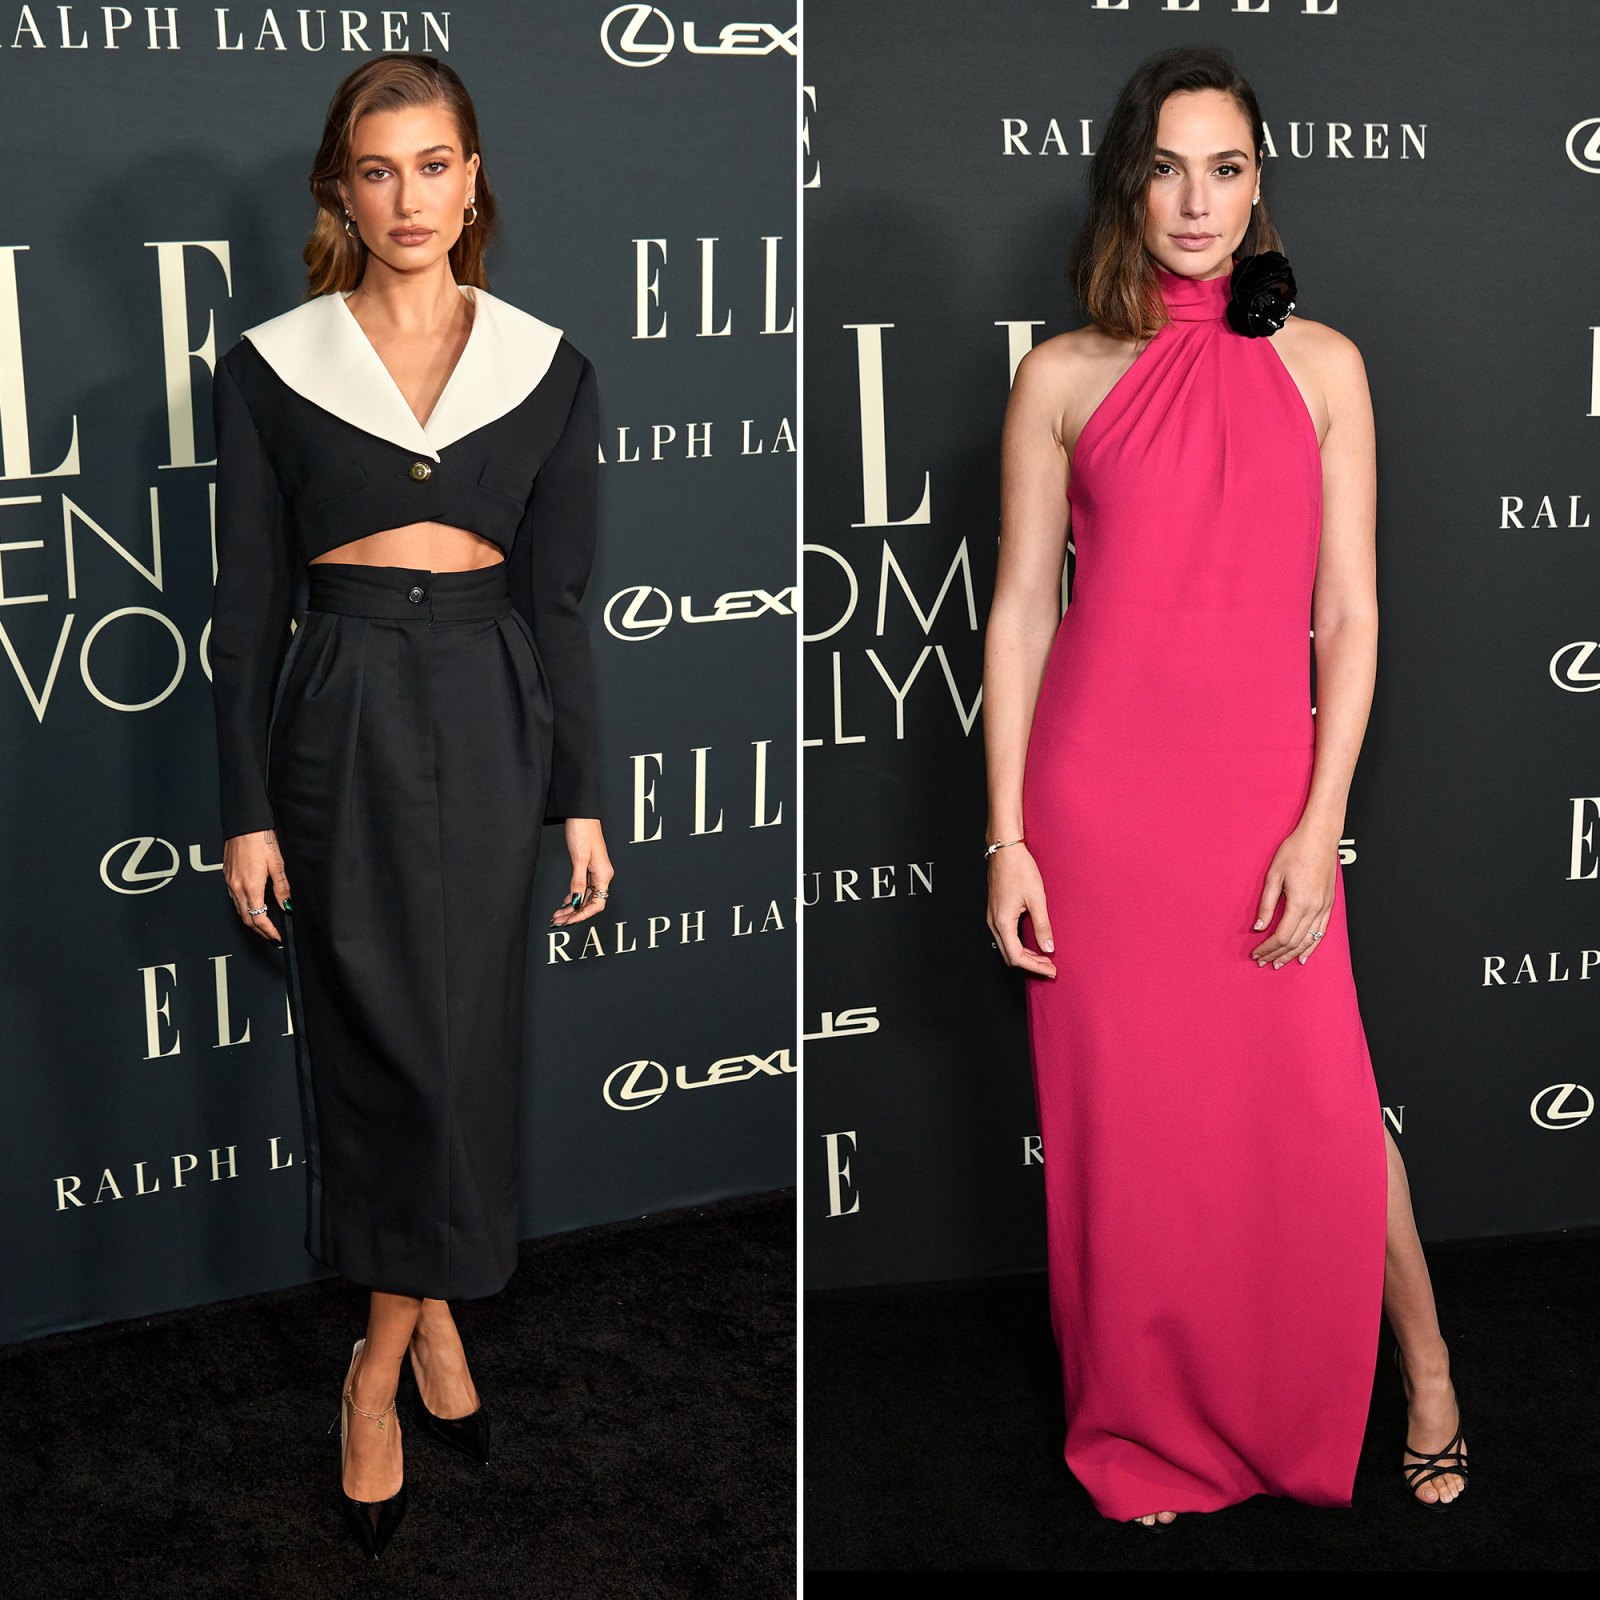 See What the Stars Wore to the Elle Women in Hollywood Celebration: Photos